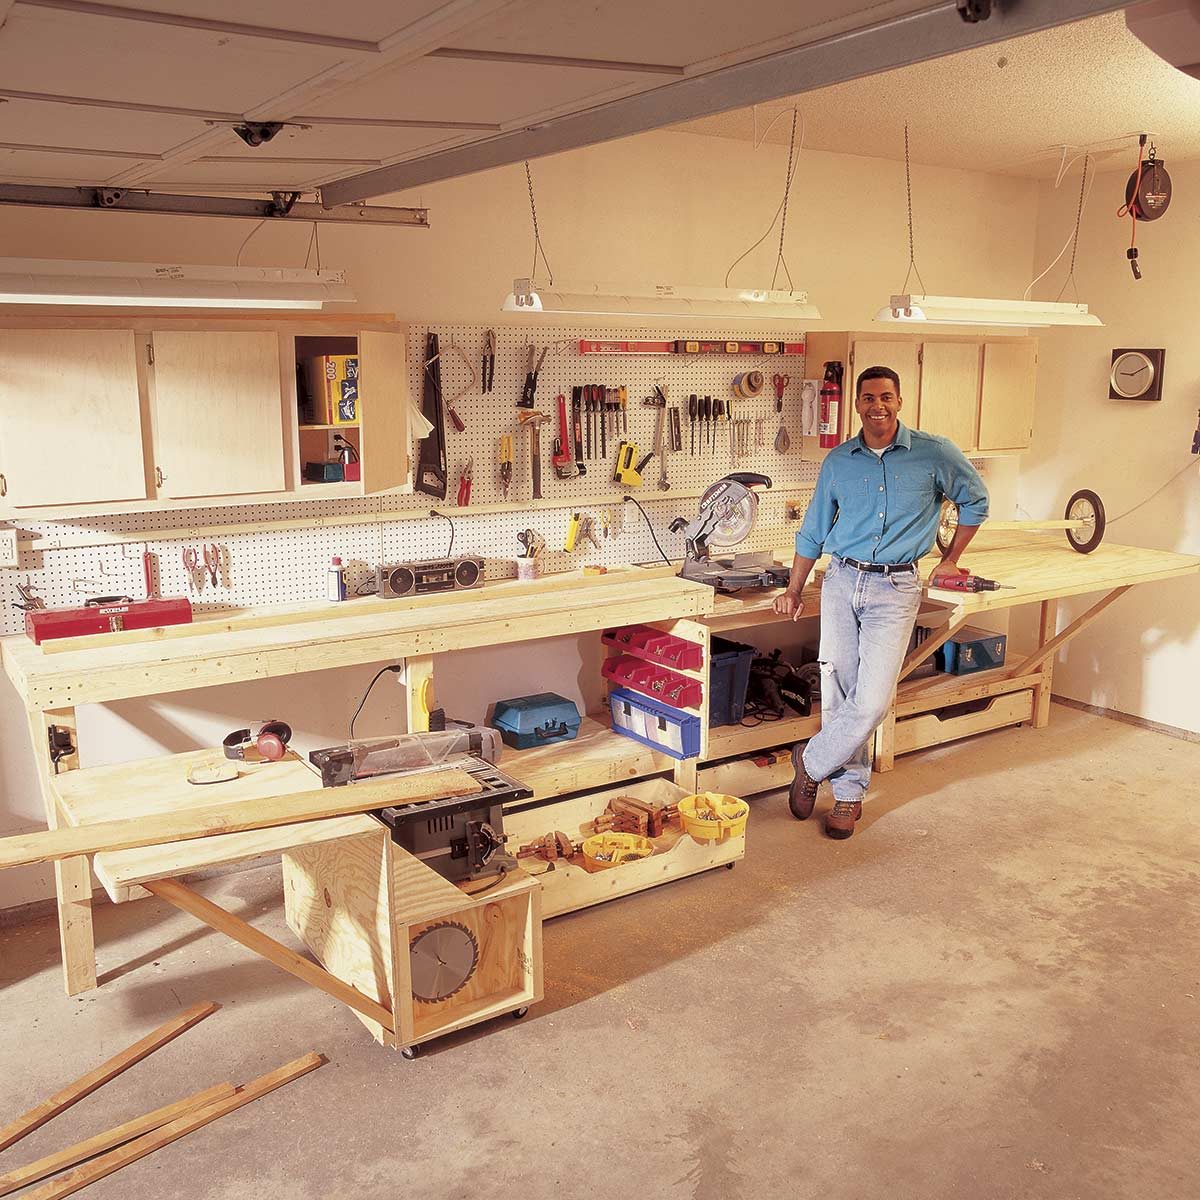 How to Build a Sturdy Workbench Using Cheap Wood